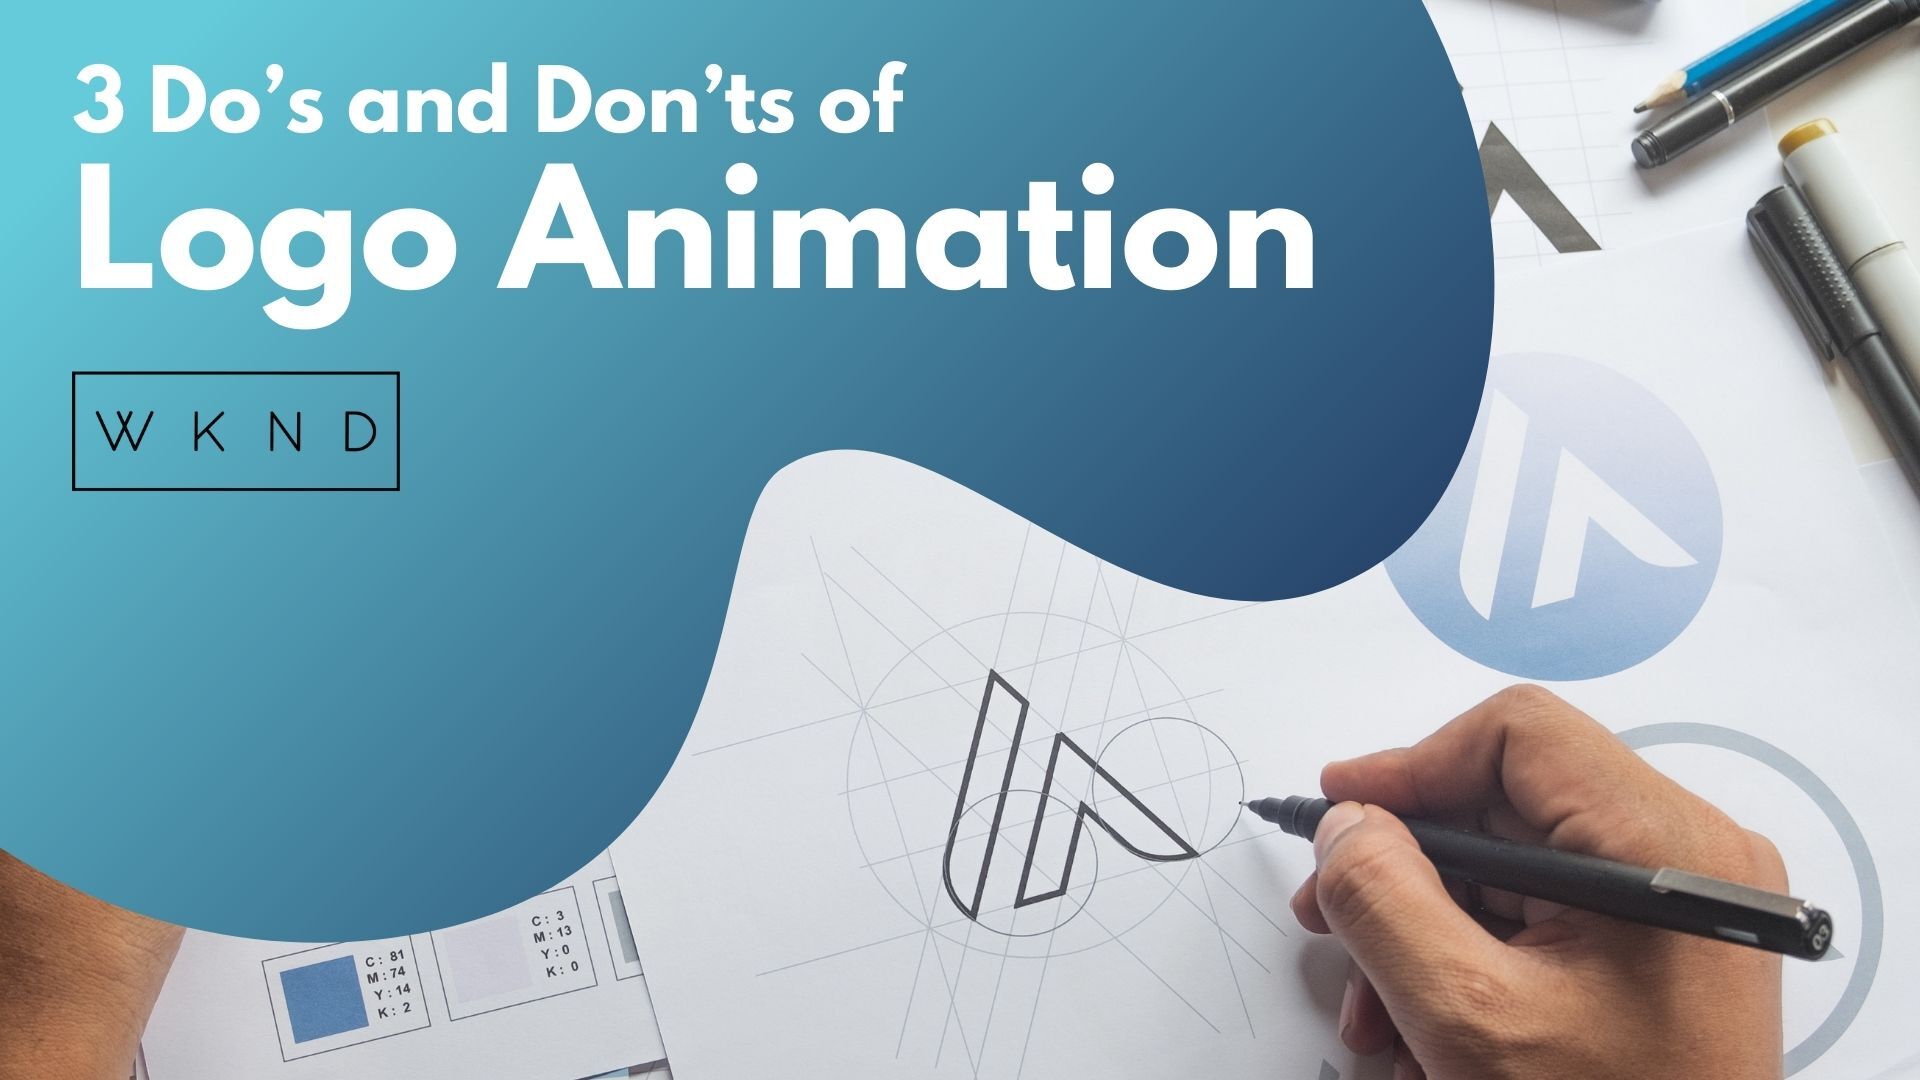 3 do’s and don’ts of logo animation (1920 × 1080 px)